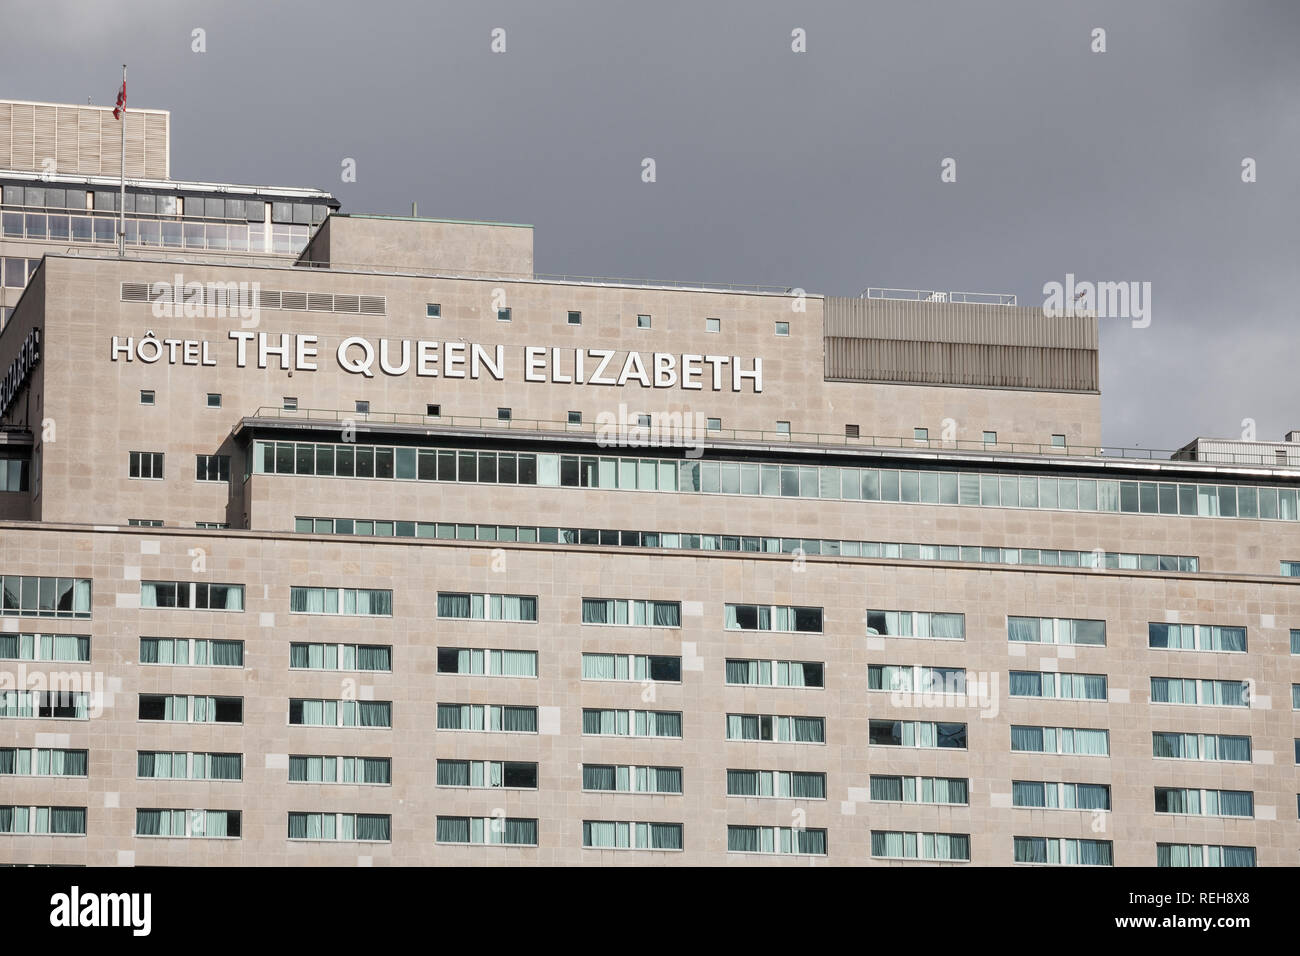 MONTREAL, CANADA - NOVEMBER 7, 2018: The Queen Elizabeth logo on their building in downtown Montreal, Quebec. Hotel Reine Elizabeth is a landmark and  Stock Photo